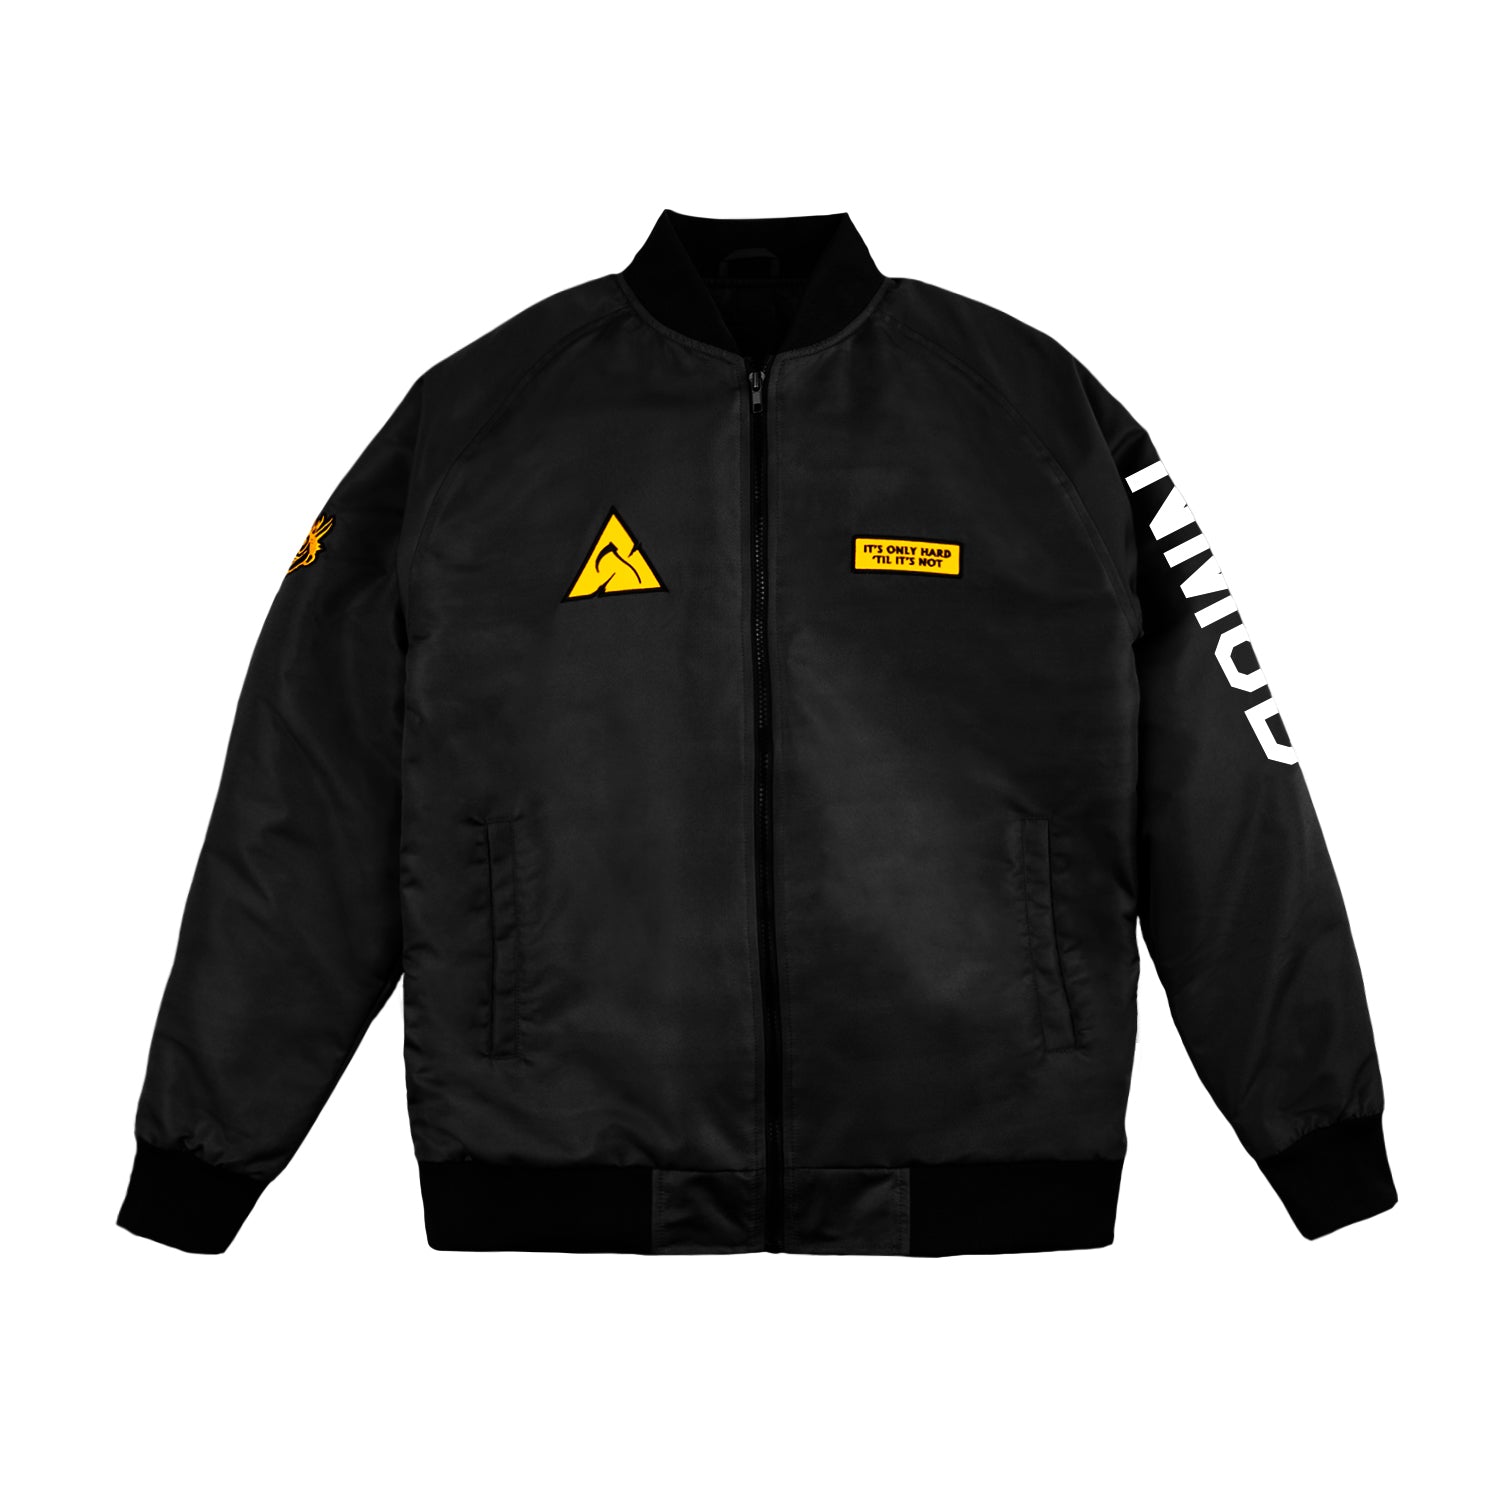 CaRtOoNz | NM8D MID WEIGHT BOMBER JACKET (BLACK) LIMITED EDITION